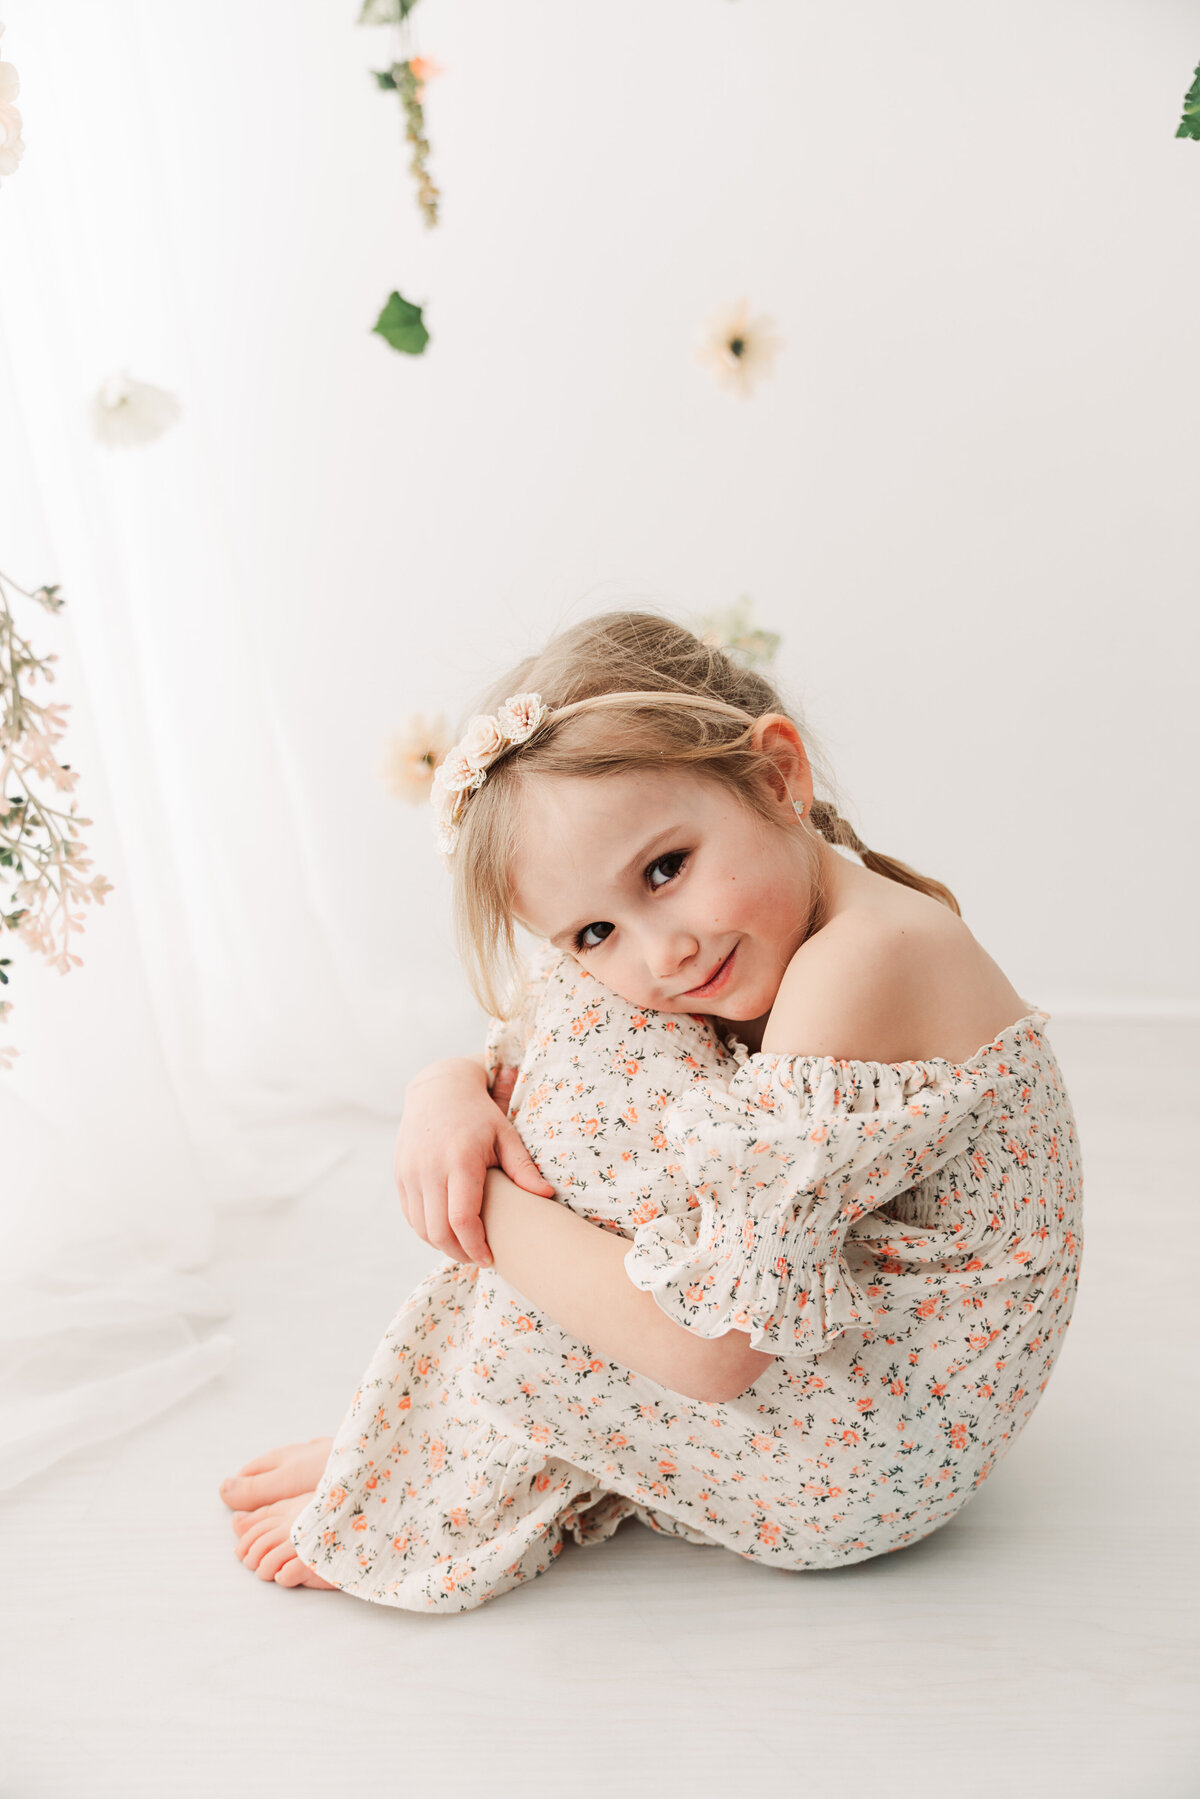 A little girl in a floral dress sitting on the floor, tilting her head charmingly with a gentle smile, in a bright room adorned with hanging flowers. Taken by Andover Newborn Photographer, Fig and Olive Photography.